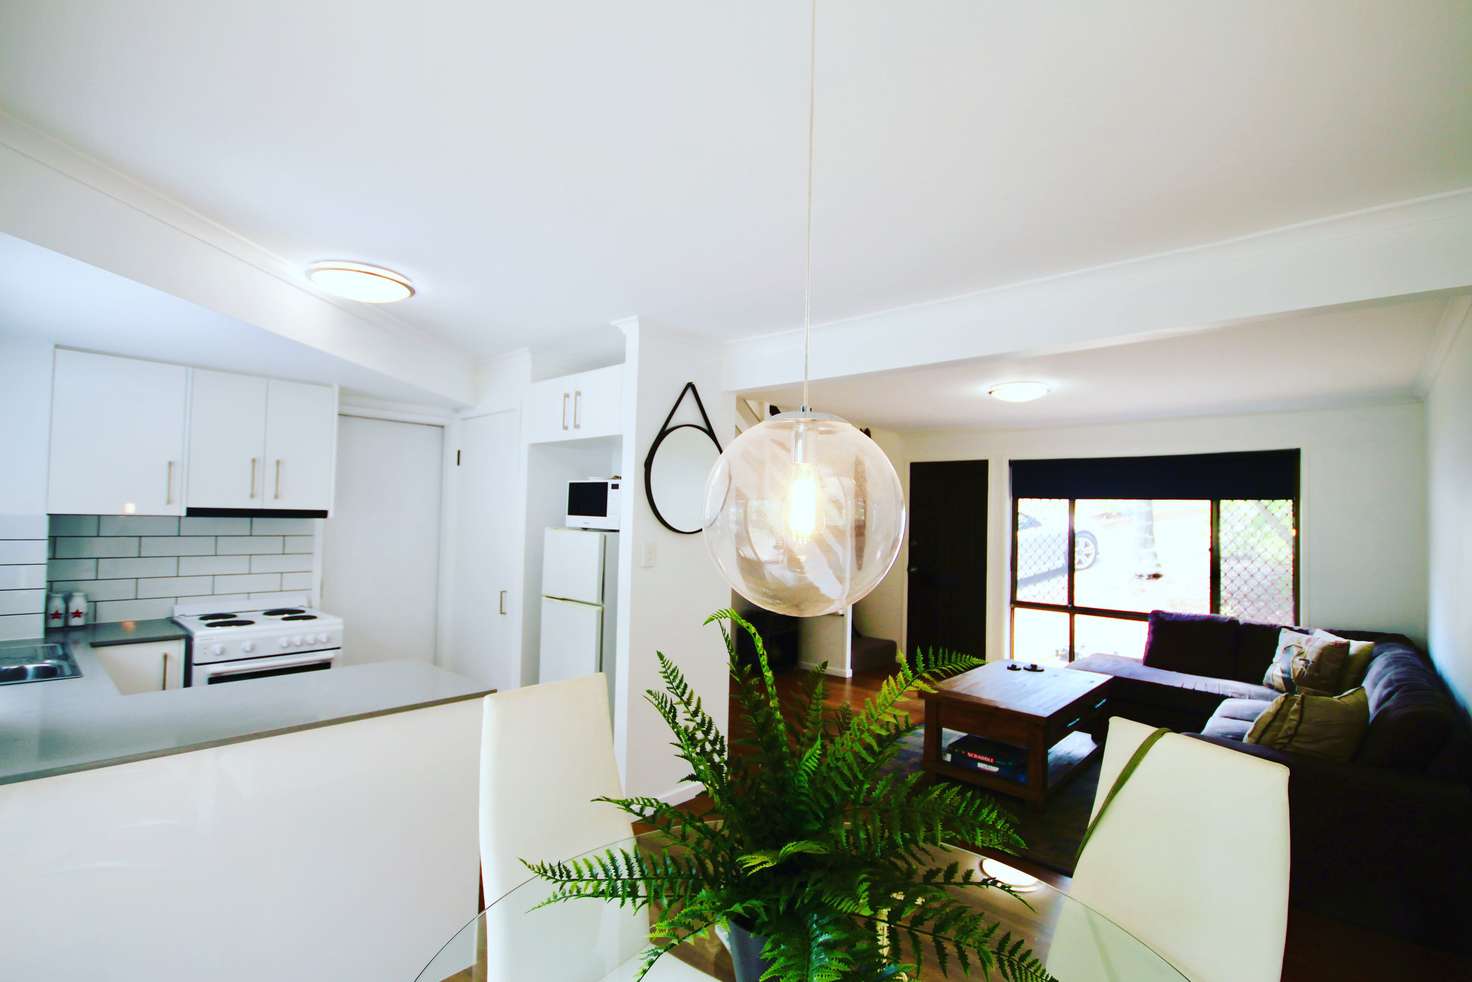 Main view of Homely house listing, 2/33 Corunna Cres, Ashmore QLD 4214